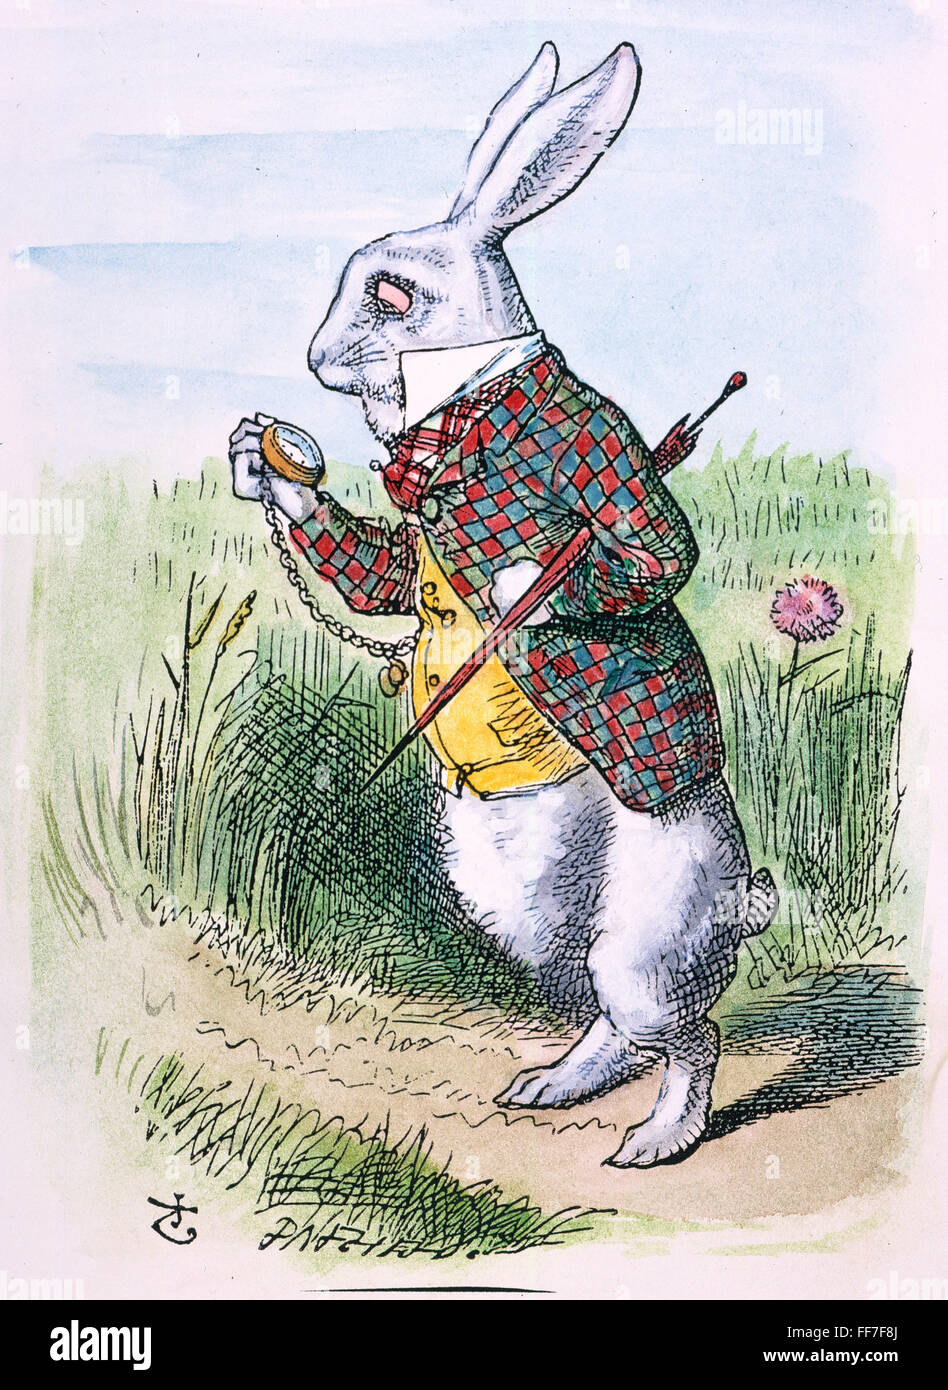 CARROLL: ALICE, 1865. /n'Oh dear! Oh dear! I shall be too late!' (The White Rabbit takes a watch out of his waistcoat-pocket). Illustration by John Tenniel from the first edition, 1865, of Lewis Carroll's 'Alice's Adventures in Wonderland.' Stock Photo